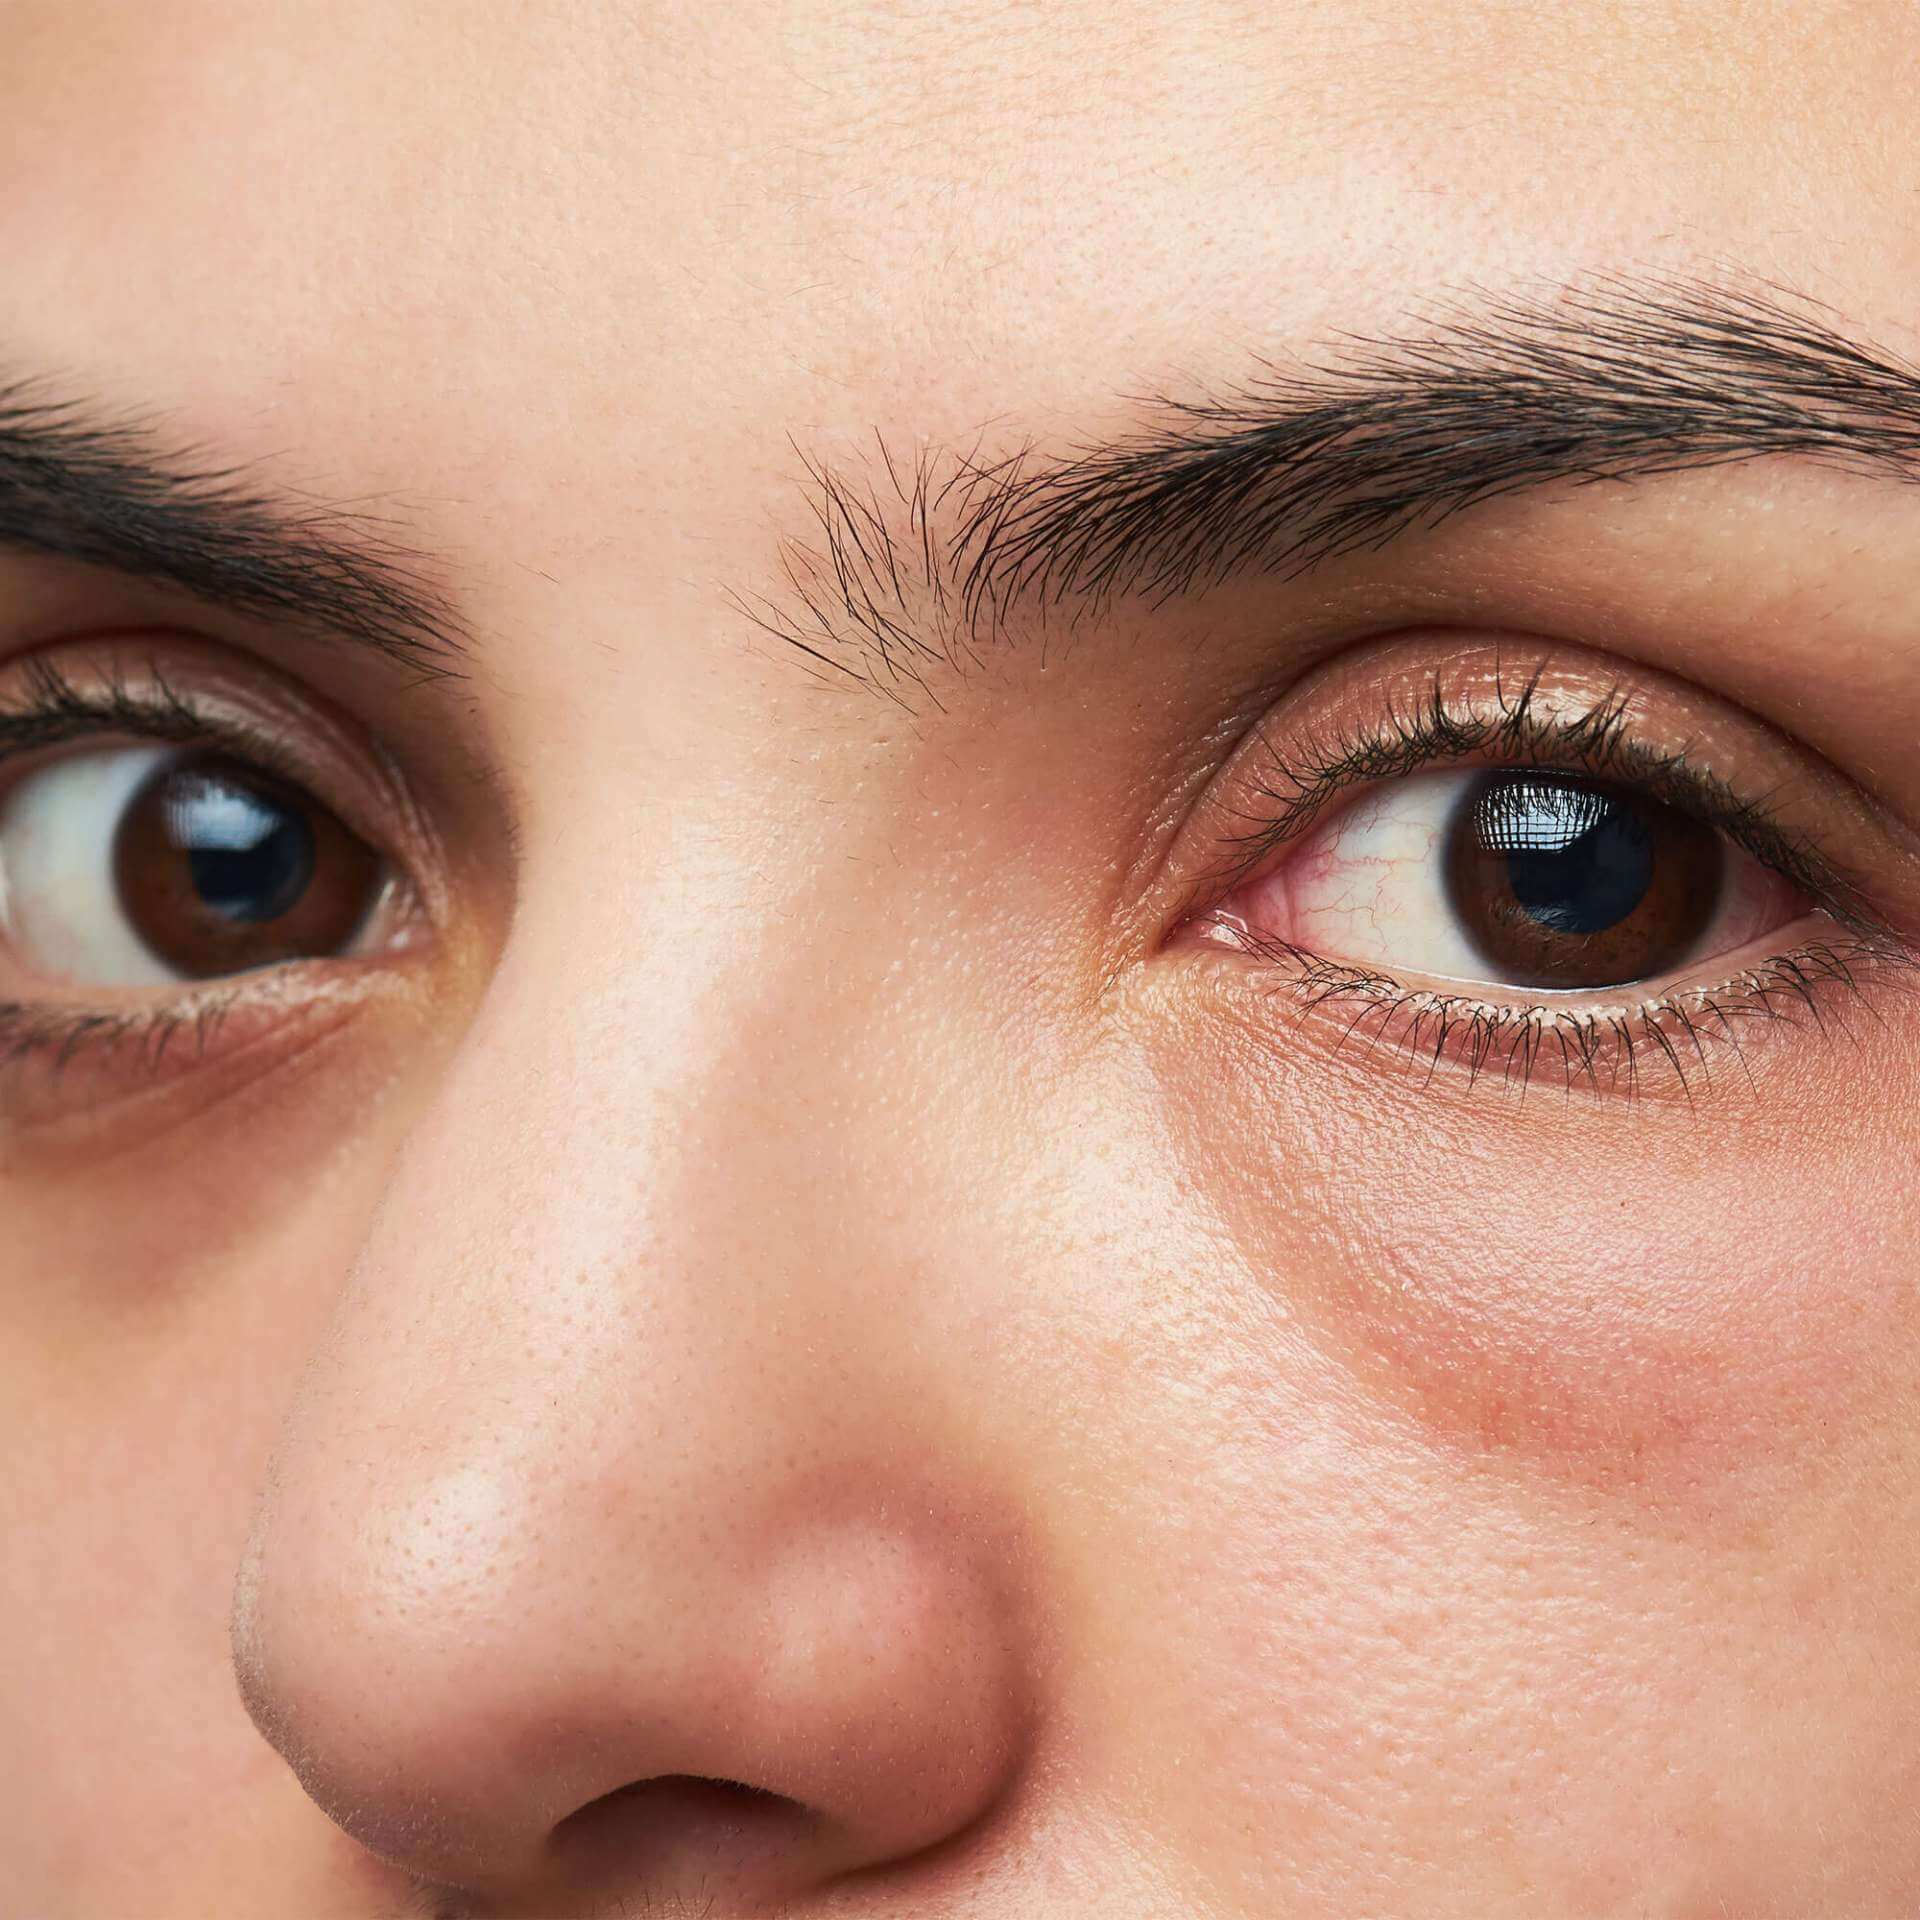 How to treat under eye circles, puffiness and eye bags